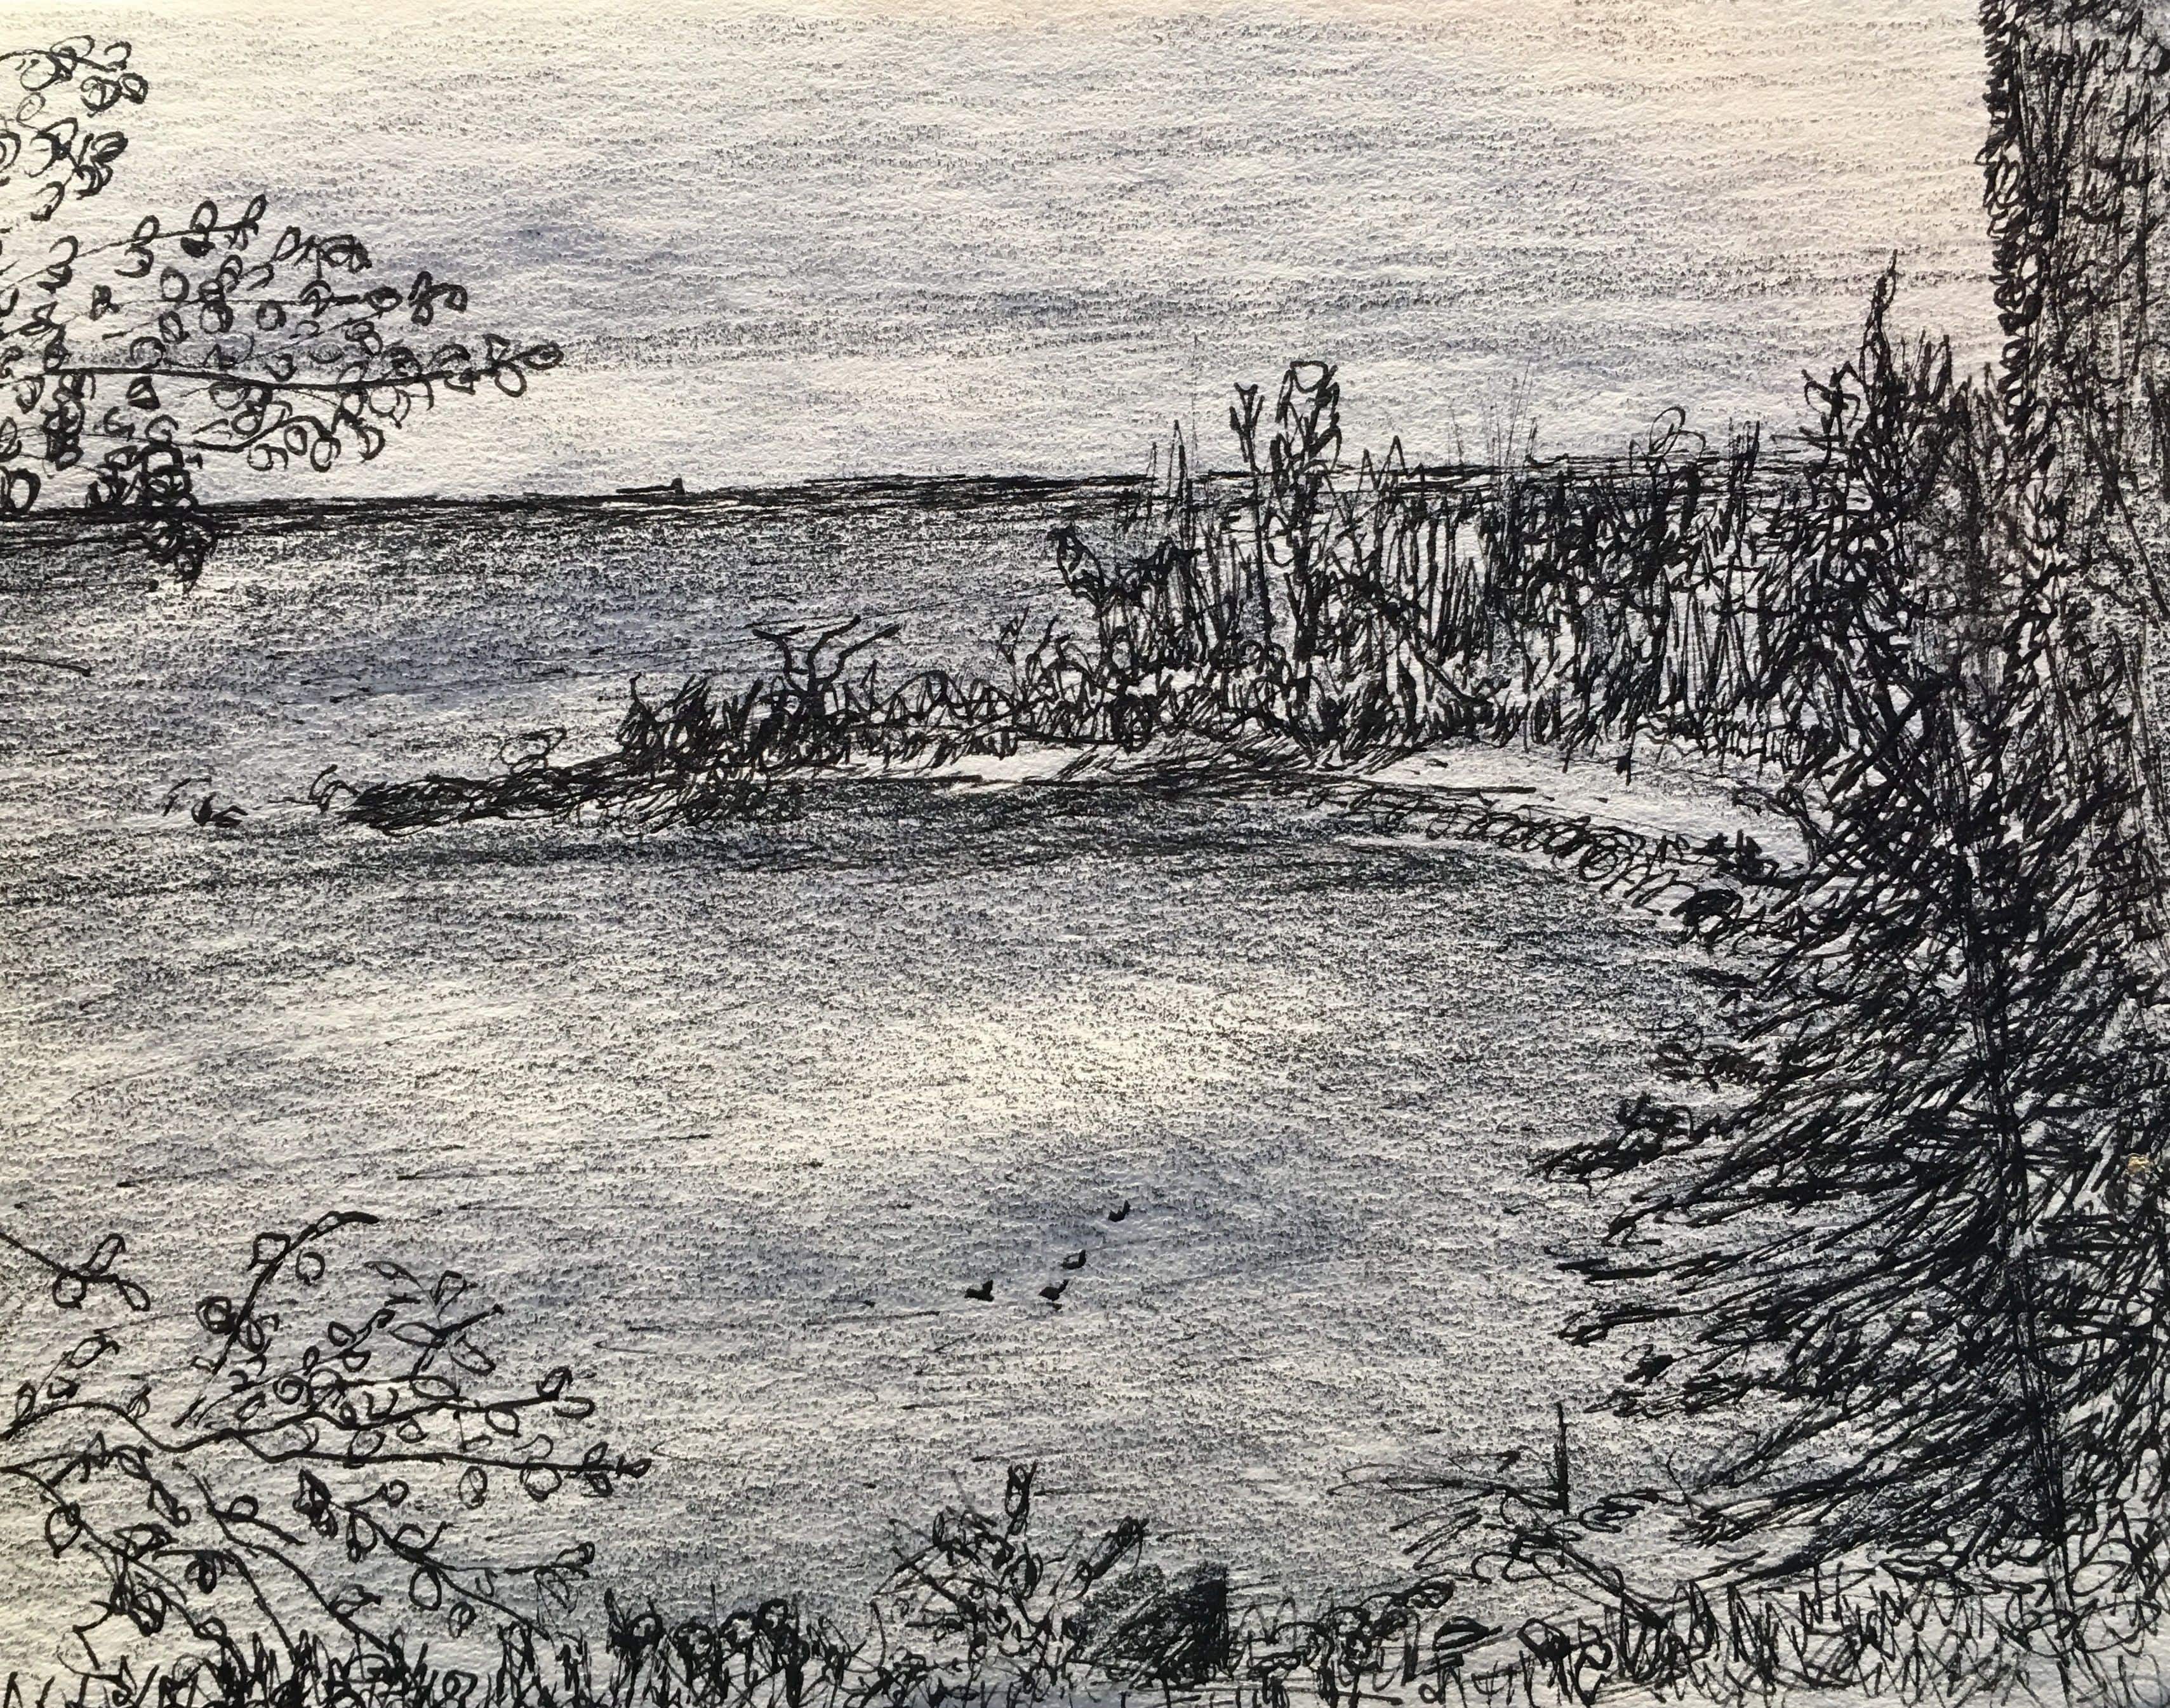 Overlooking Thompson Beach, 2016
Drawing Pen and Drawing Pencil on Paper
7.75"W x 6"H, Walli White, artist